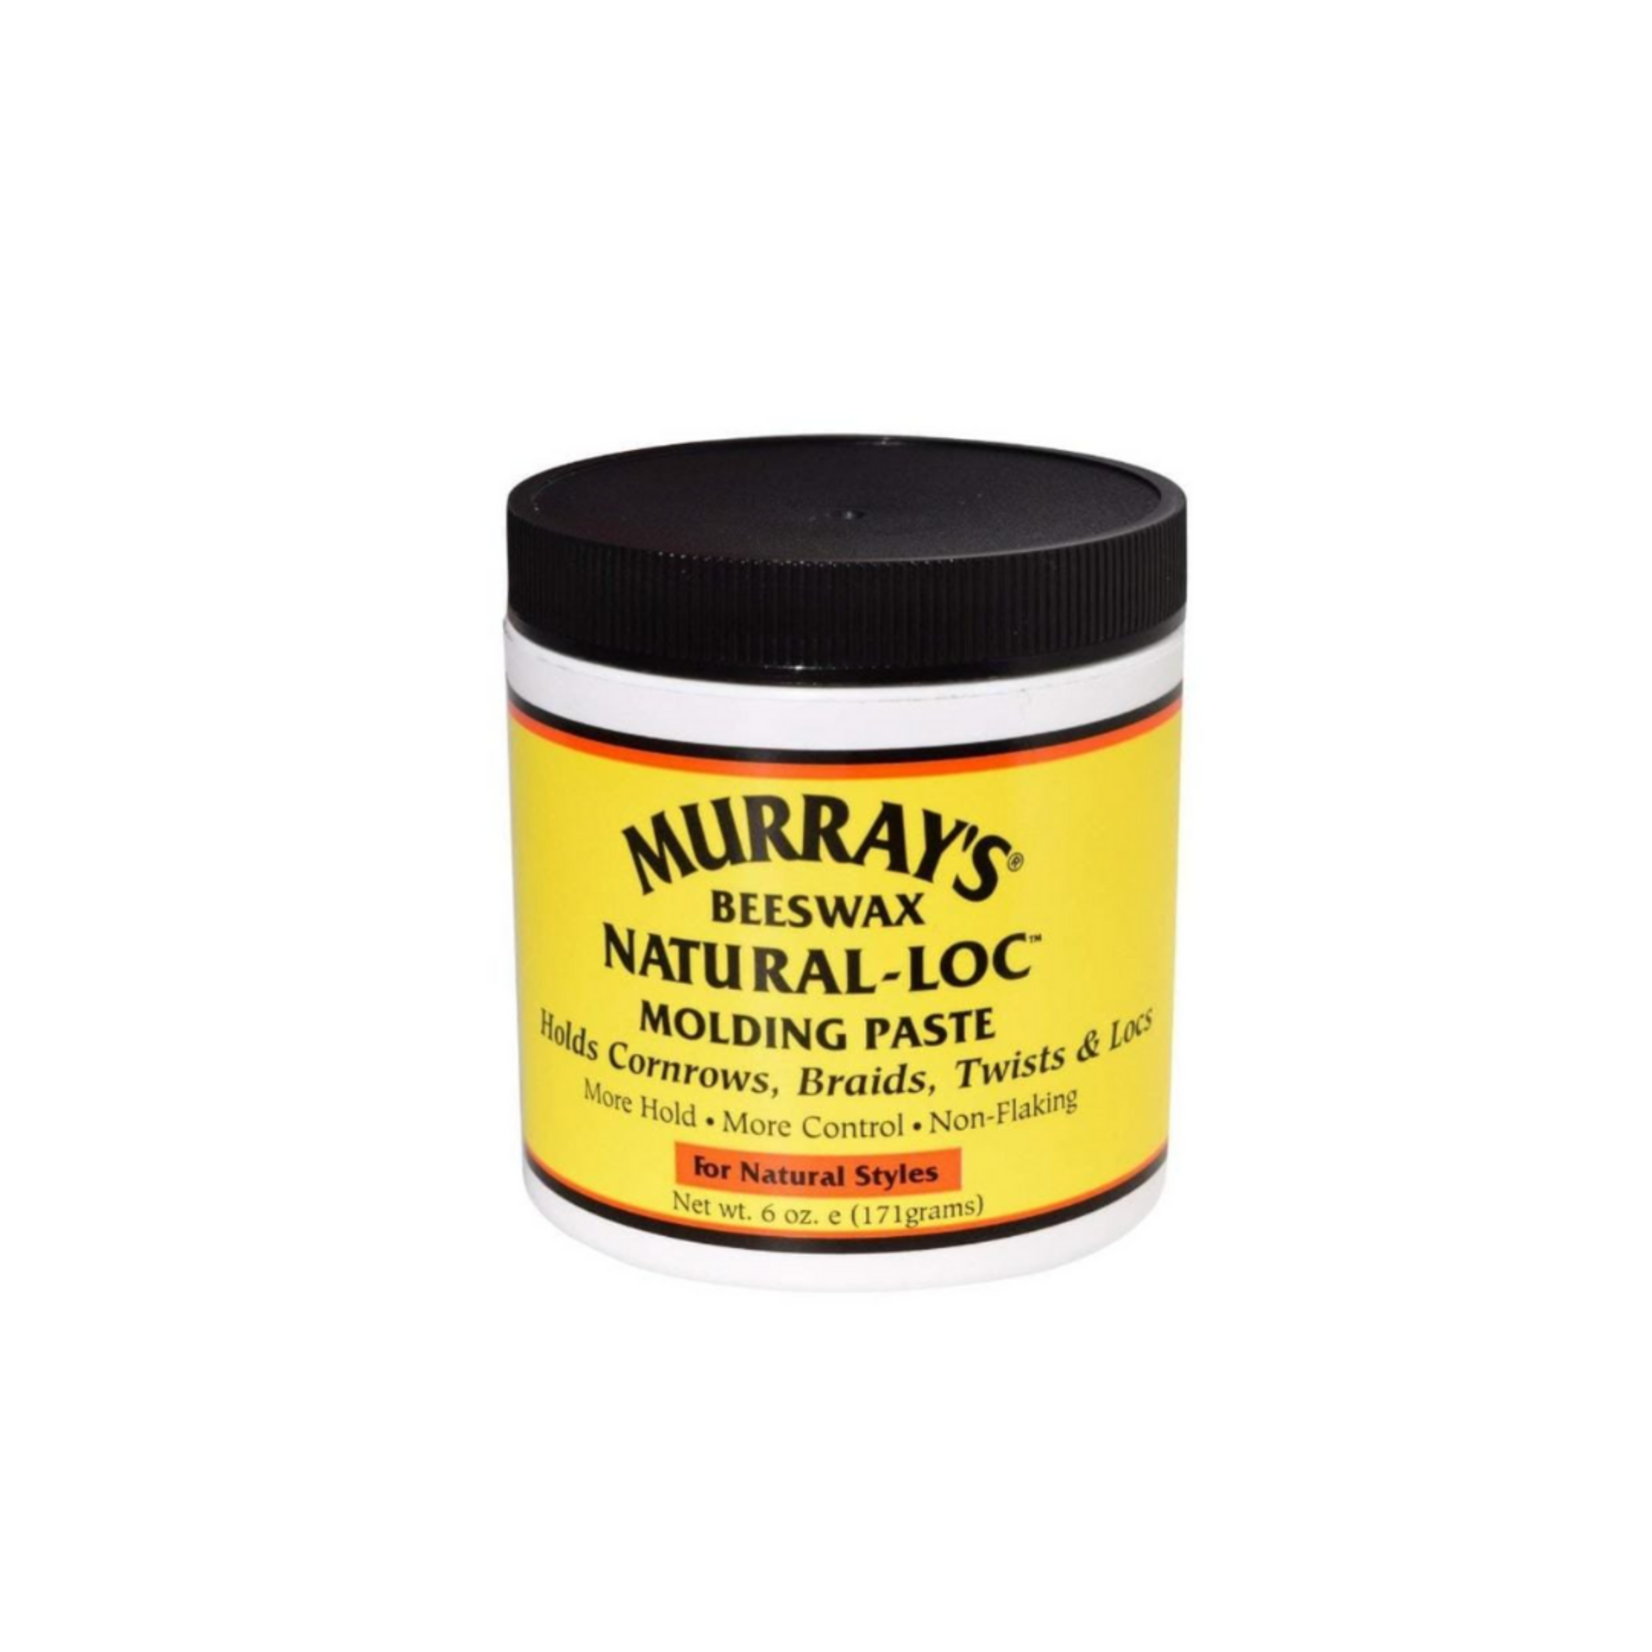 MURRAY'S Murrays Beeswax Natural -Loc Molding Paste 6oz